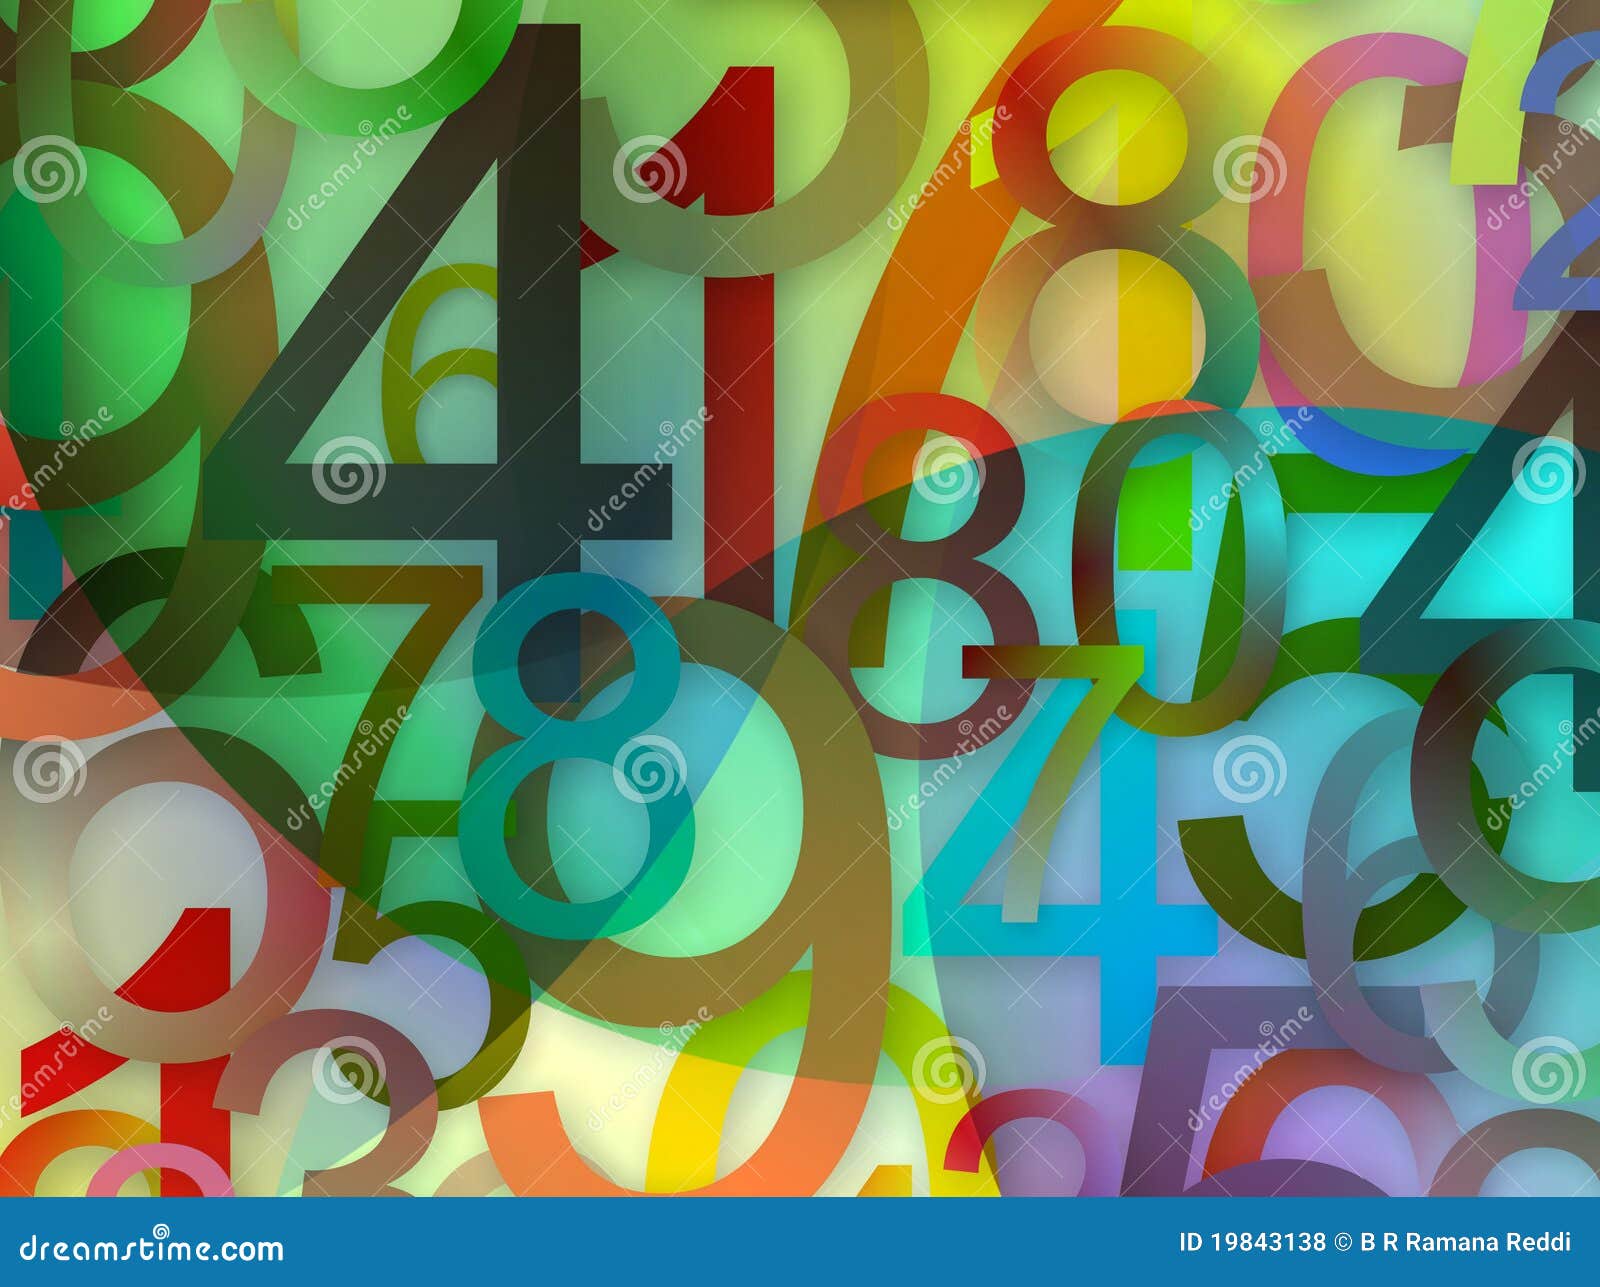 Numbers background stock illustration. Illustration of count - 19843138